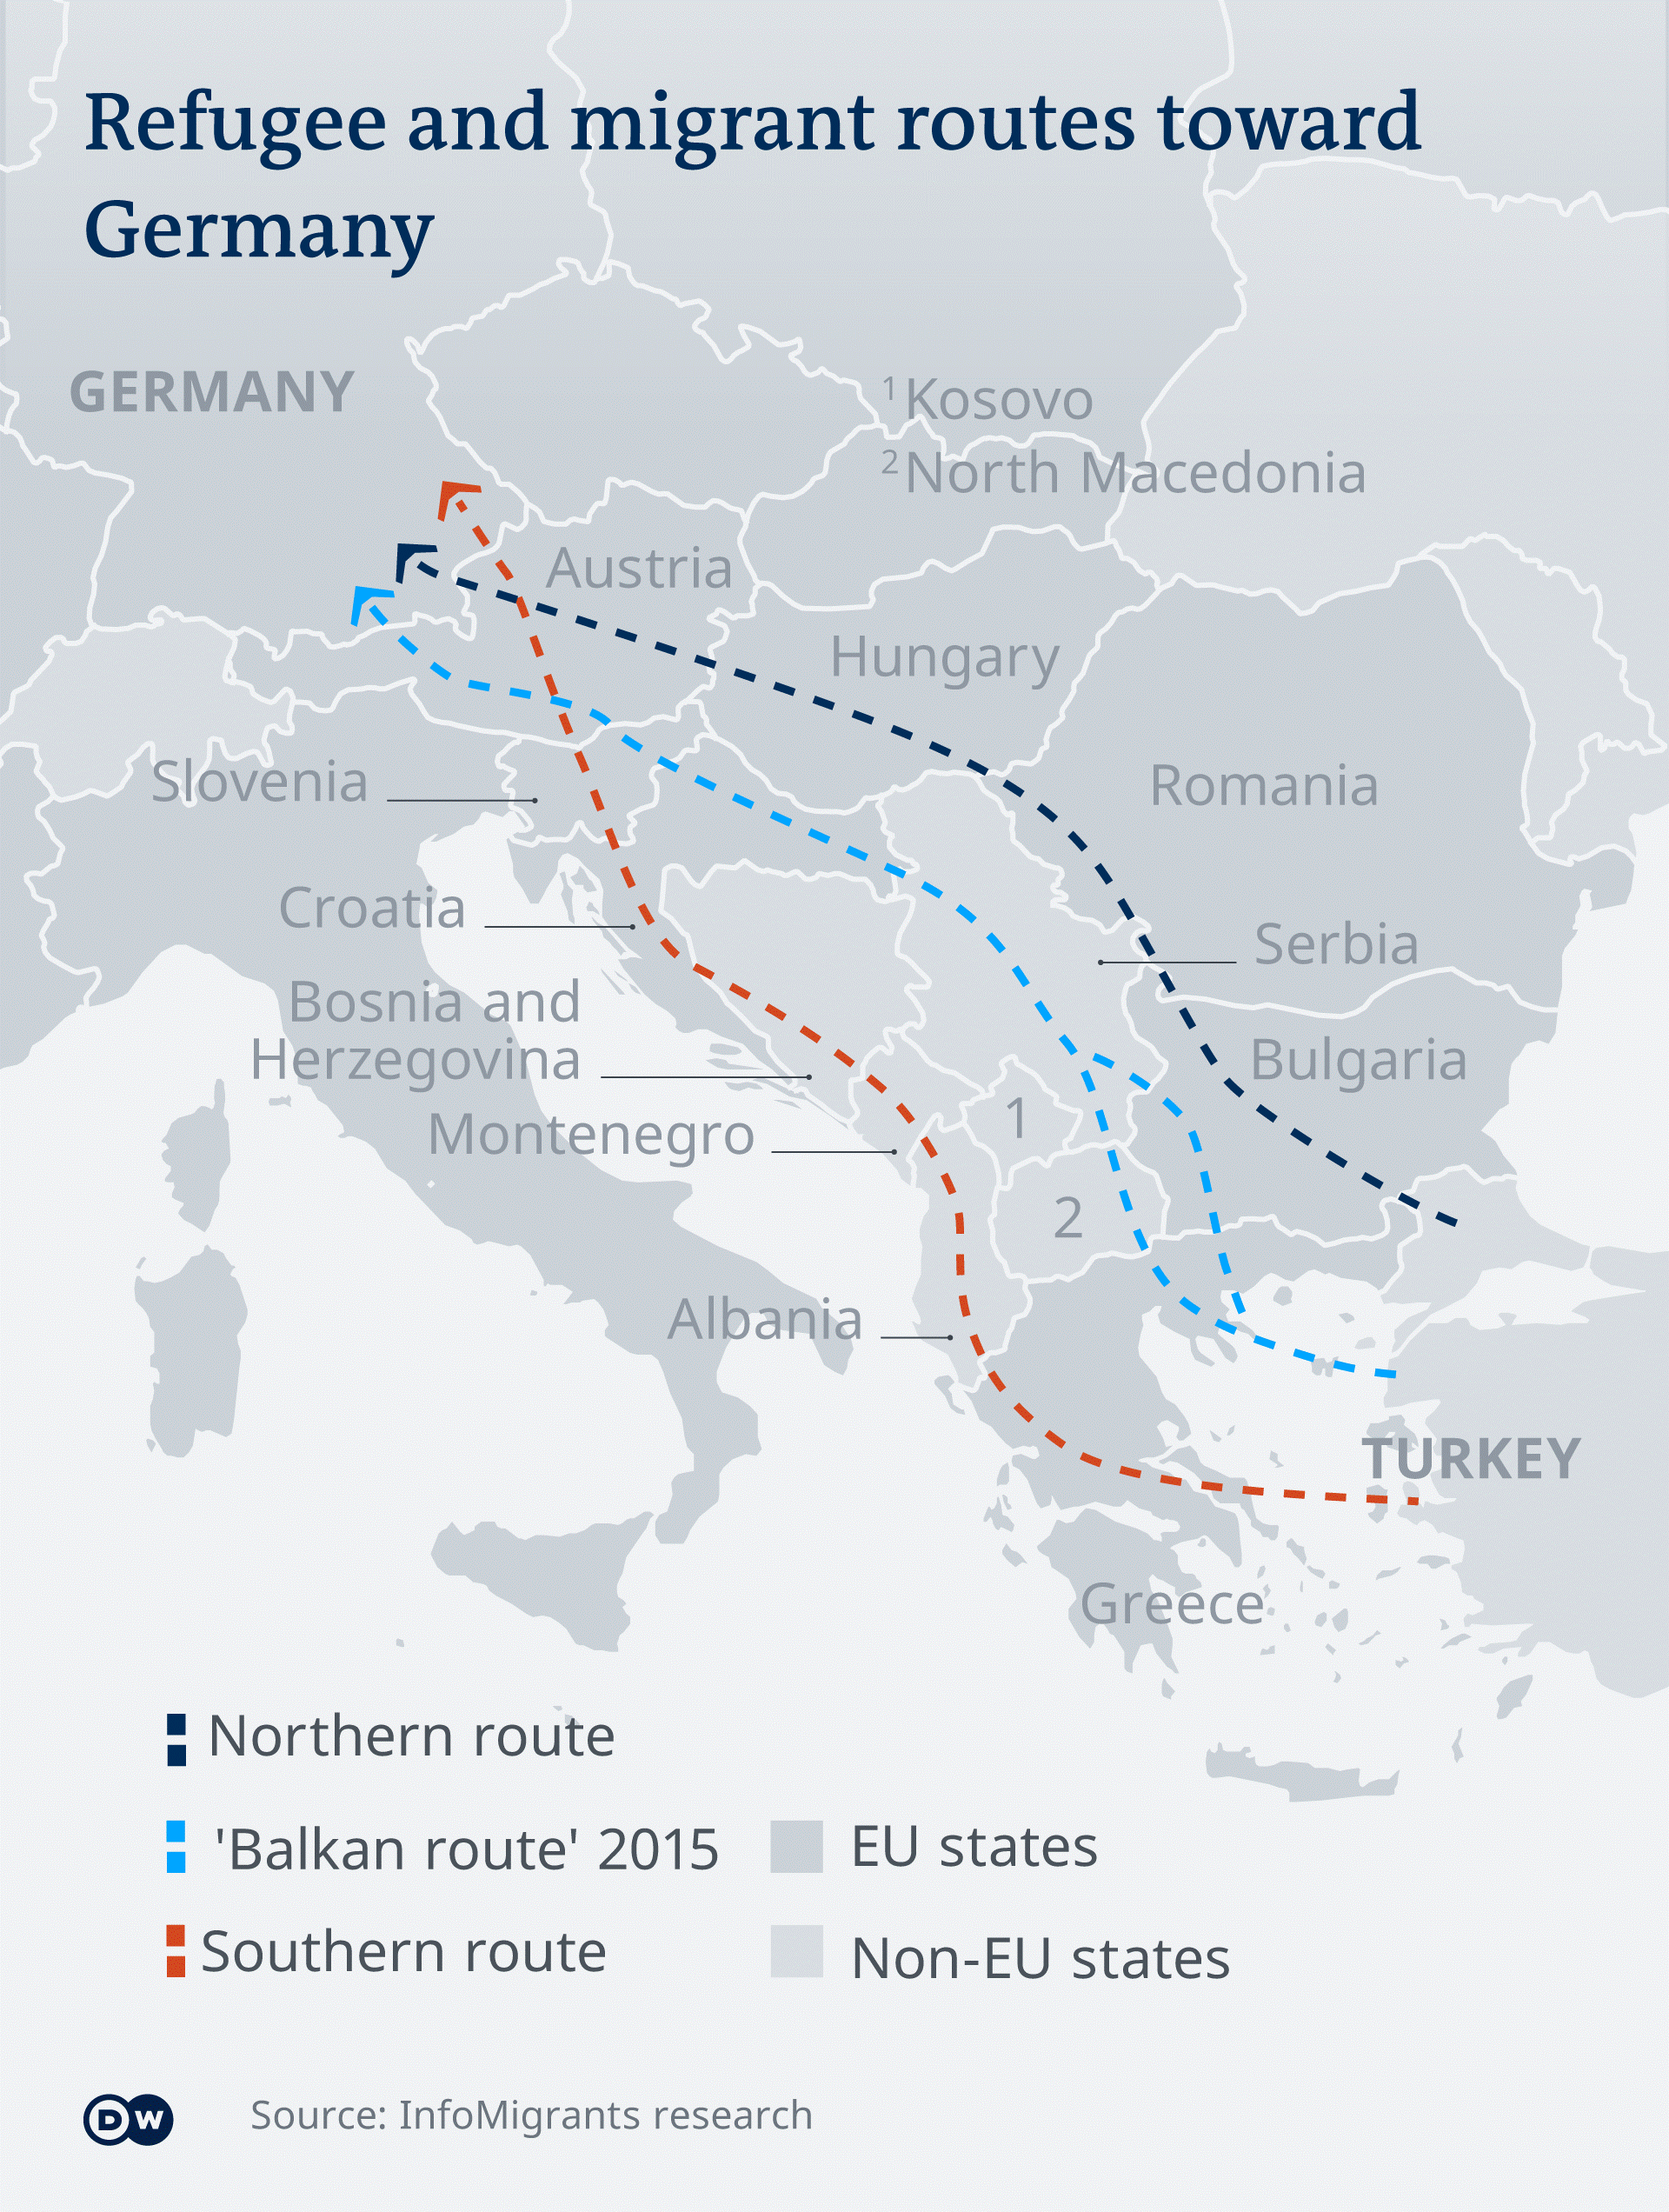 Refugee and migrant routes towards Germany (source: Infomigrants research)